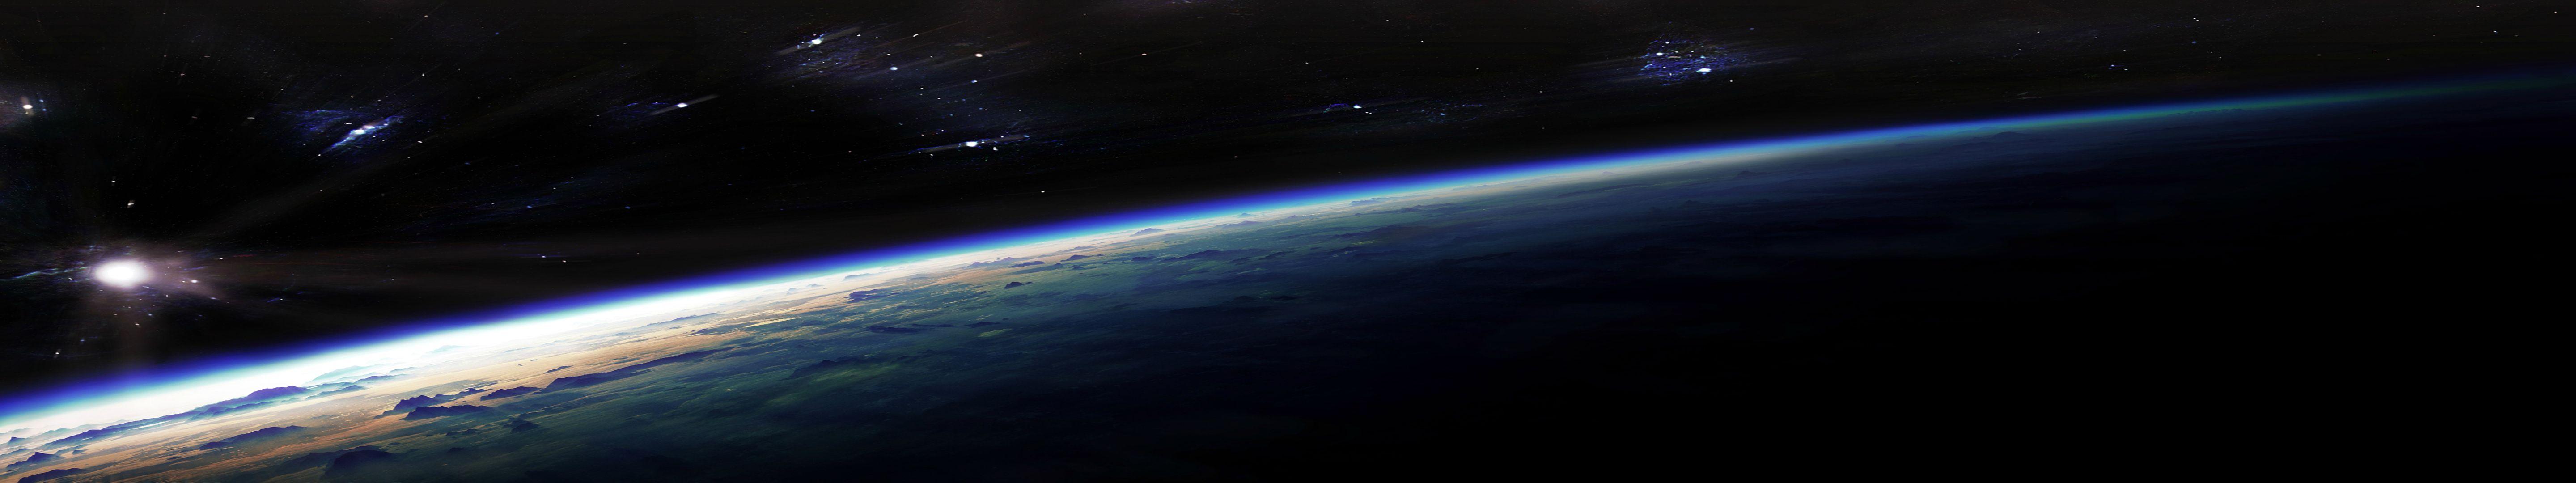 Space 5760X1080 Wallpapers - Top Free Space 5760X1080 Backgrounds